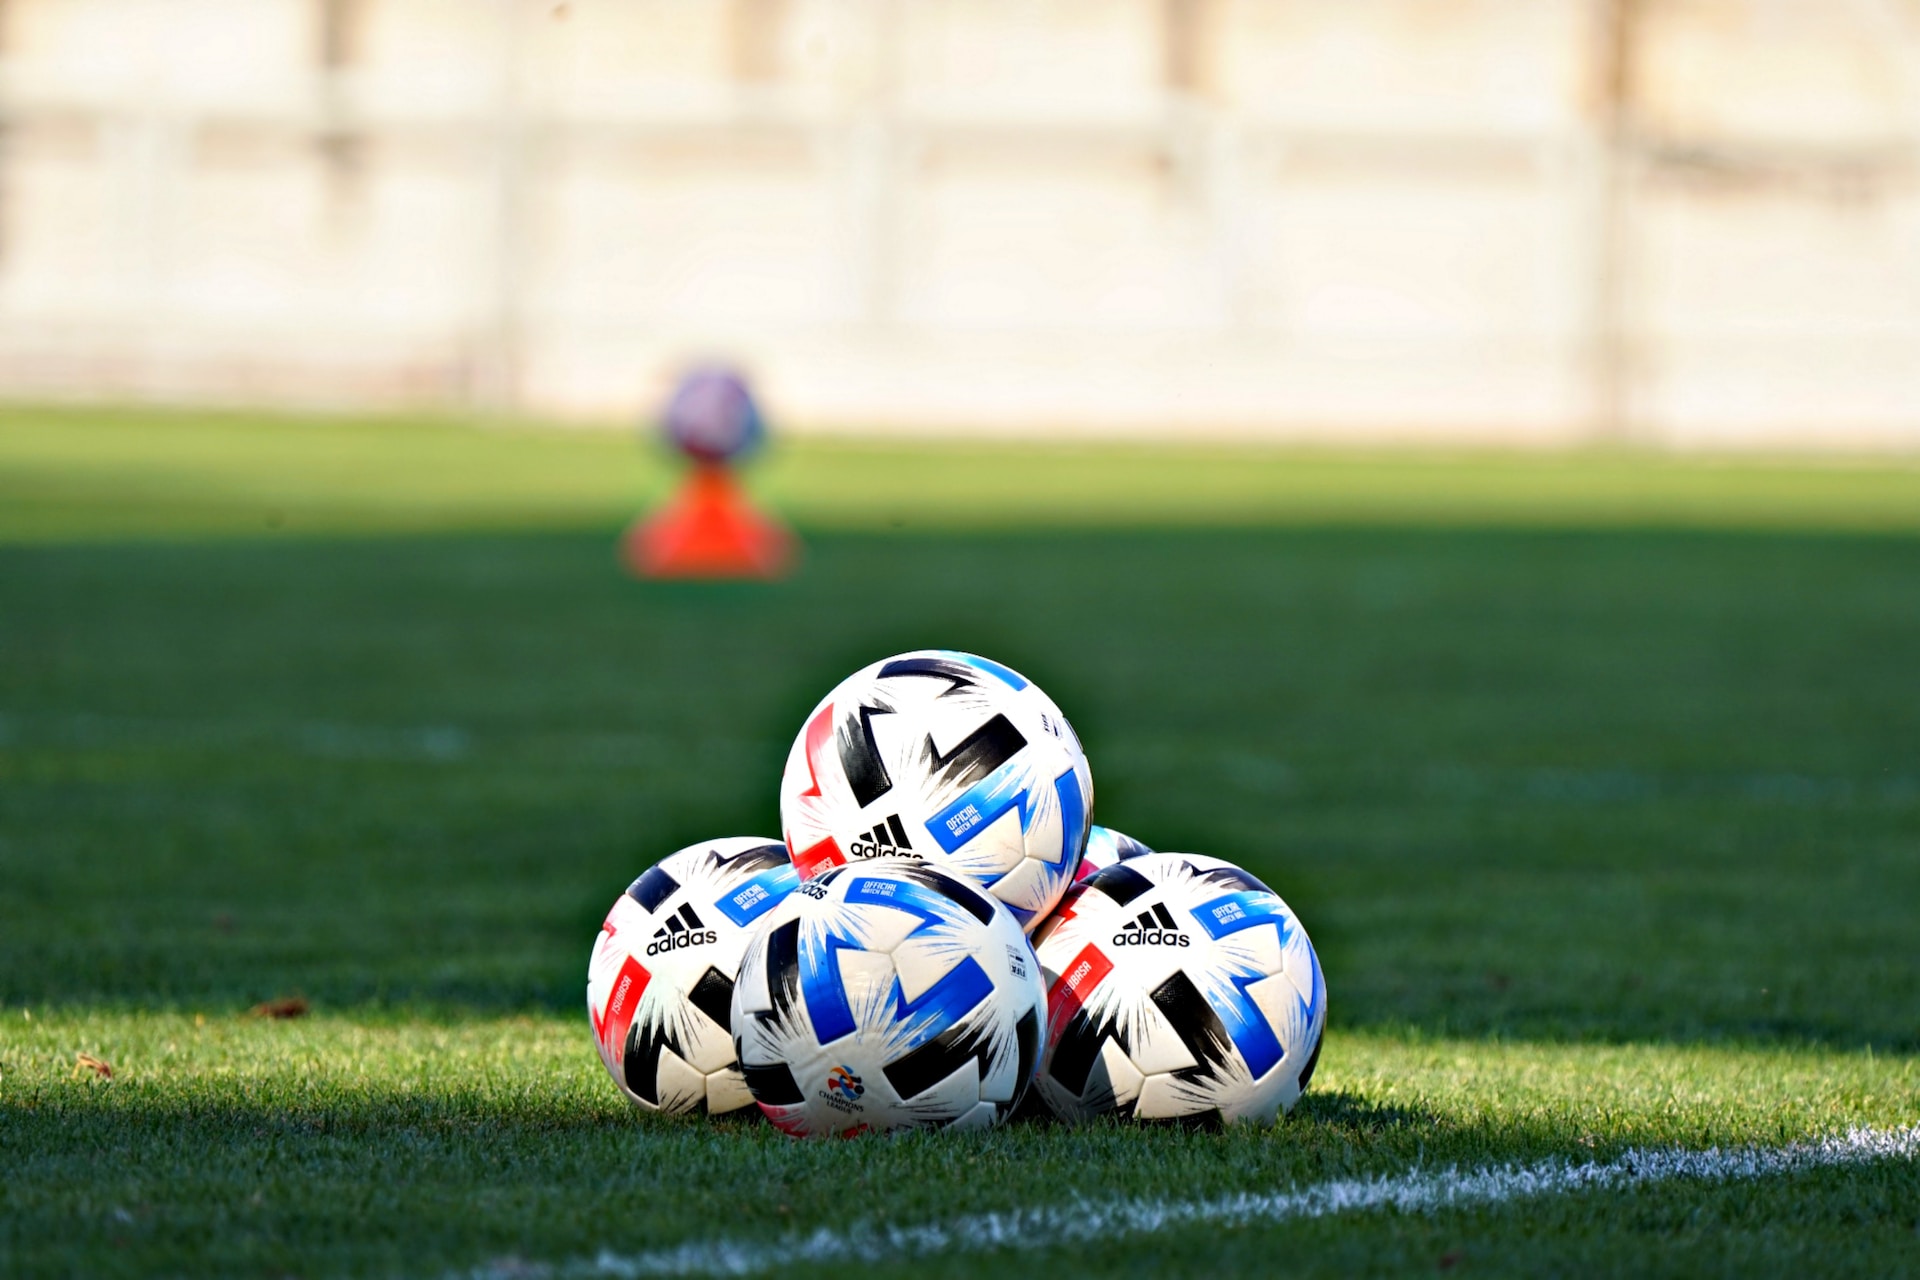 The Ultimate Guide to Choosing the Best Ball for Soccer